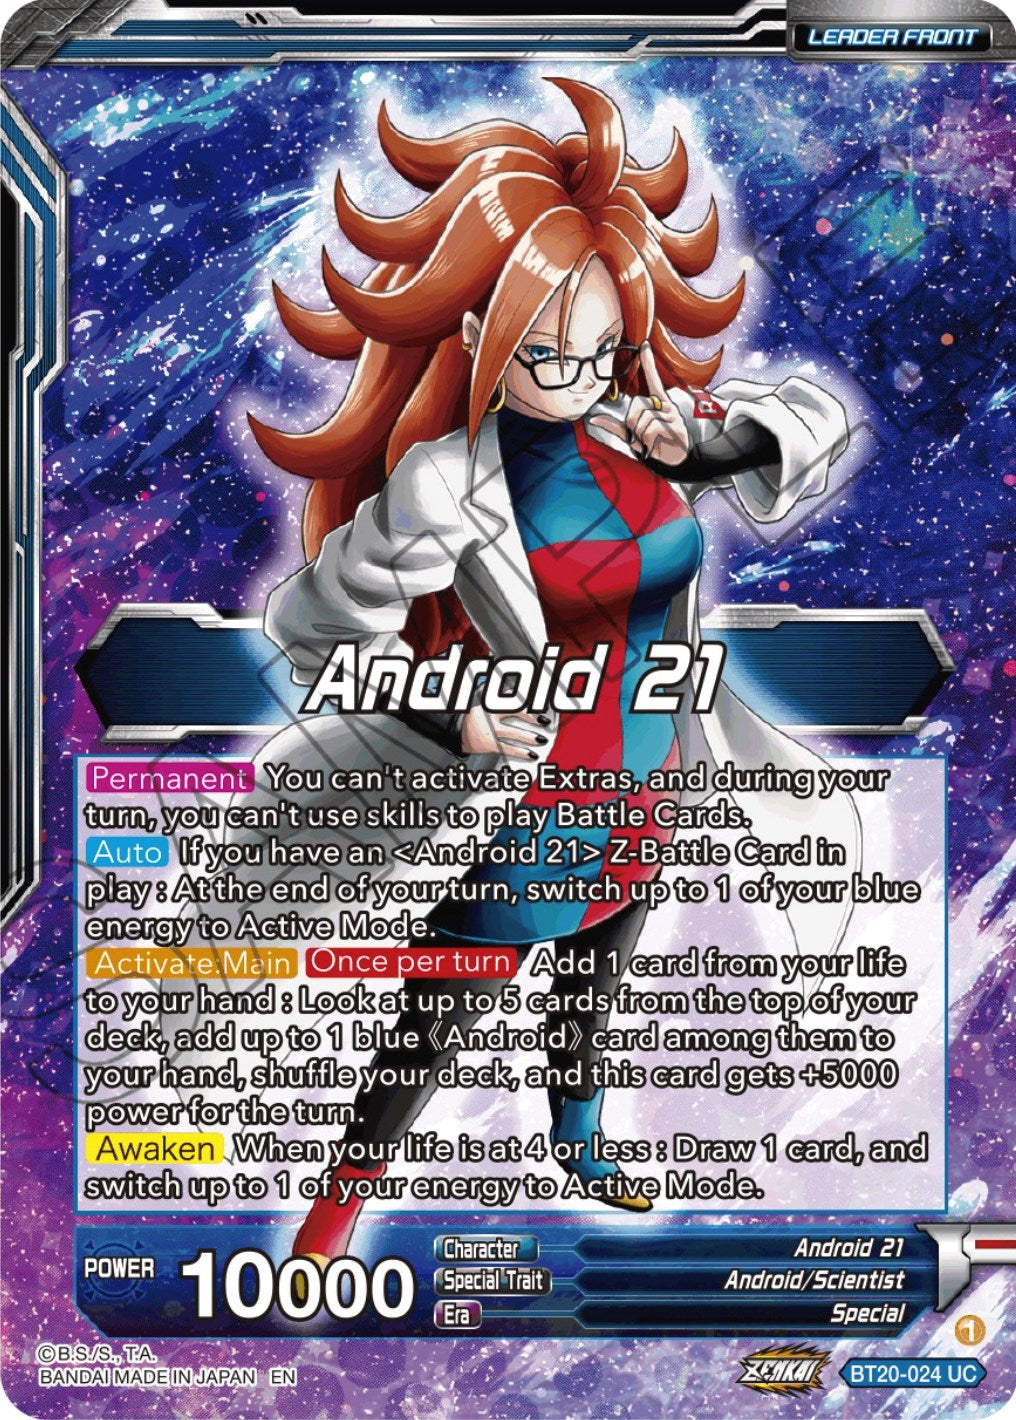 Android 21 // Android 21, the Nature of Evil (BT20-024) [Power Absorbed Prerelease Promos] | Mindsight Gaming